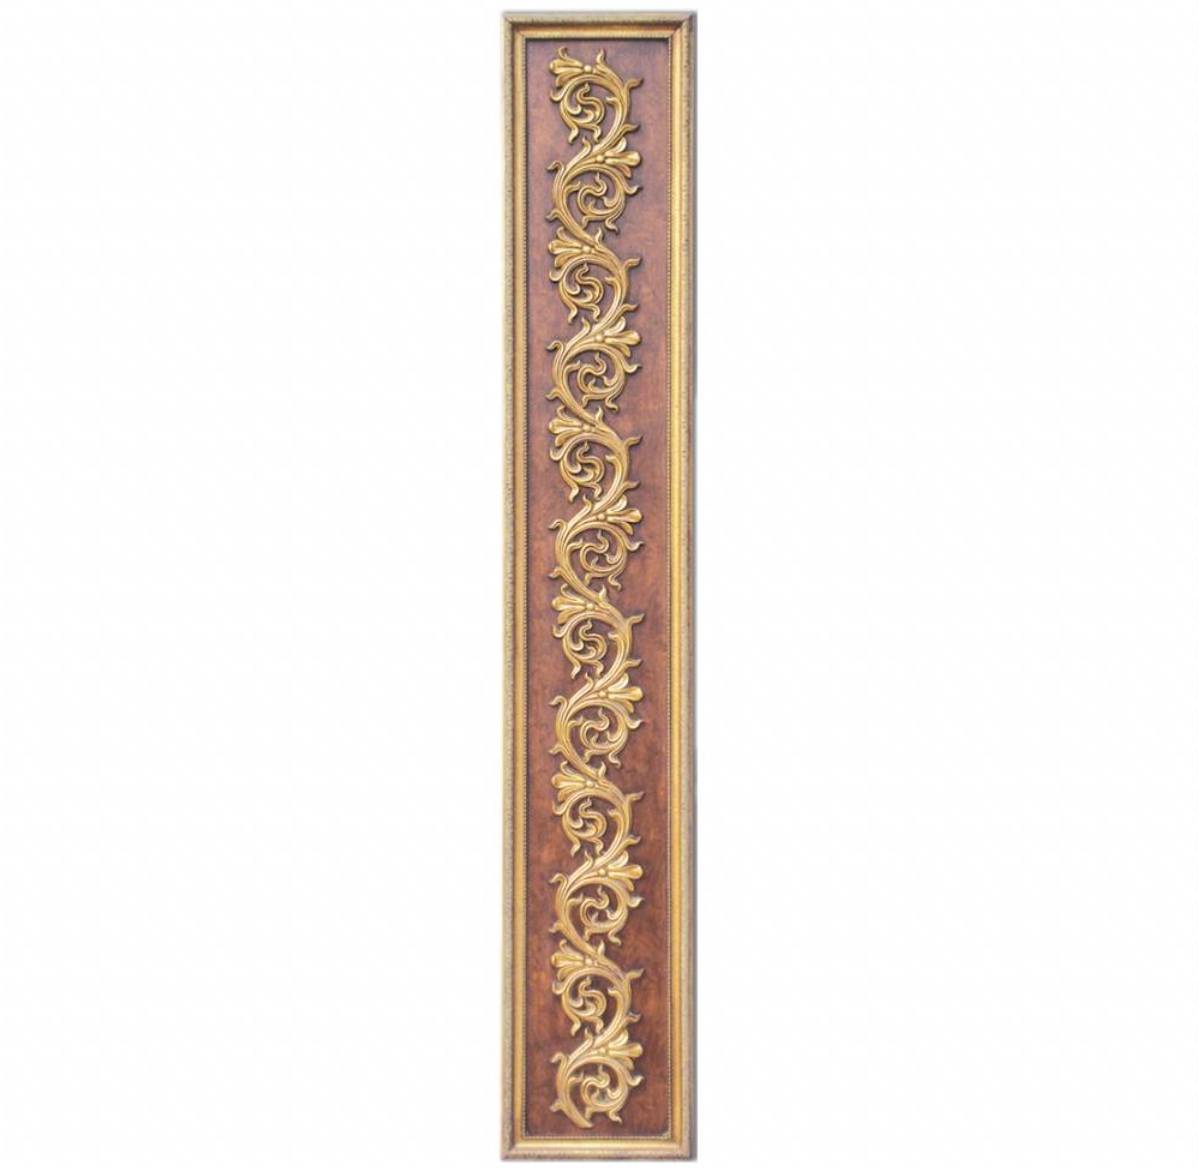 Banruo classical style artistic 3D carving plaque plastic affordable wall paneling molding decor arts wall panel